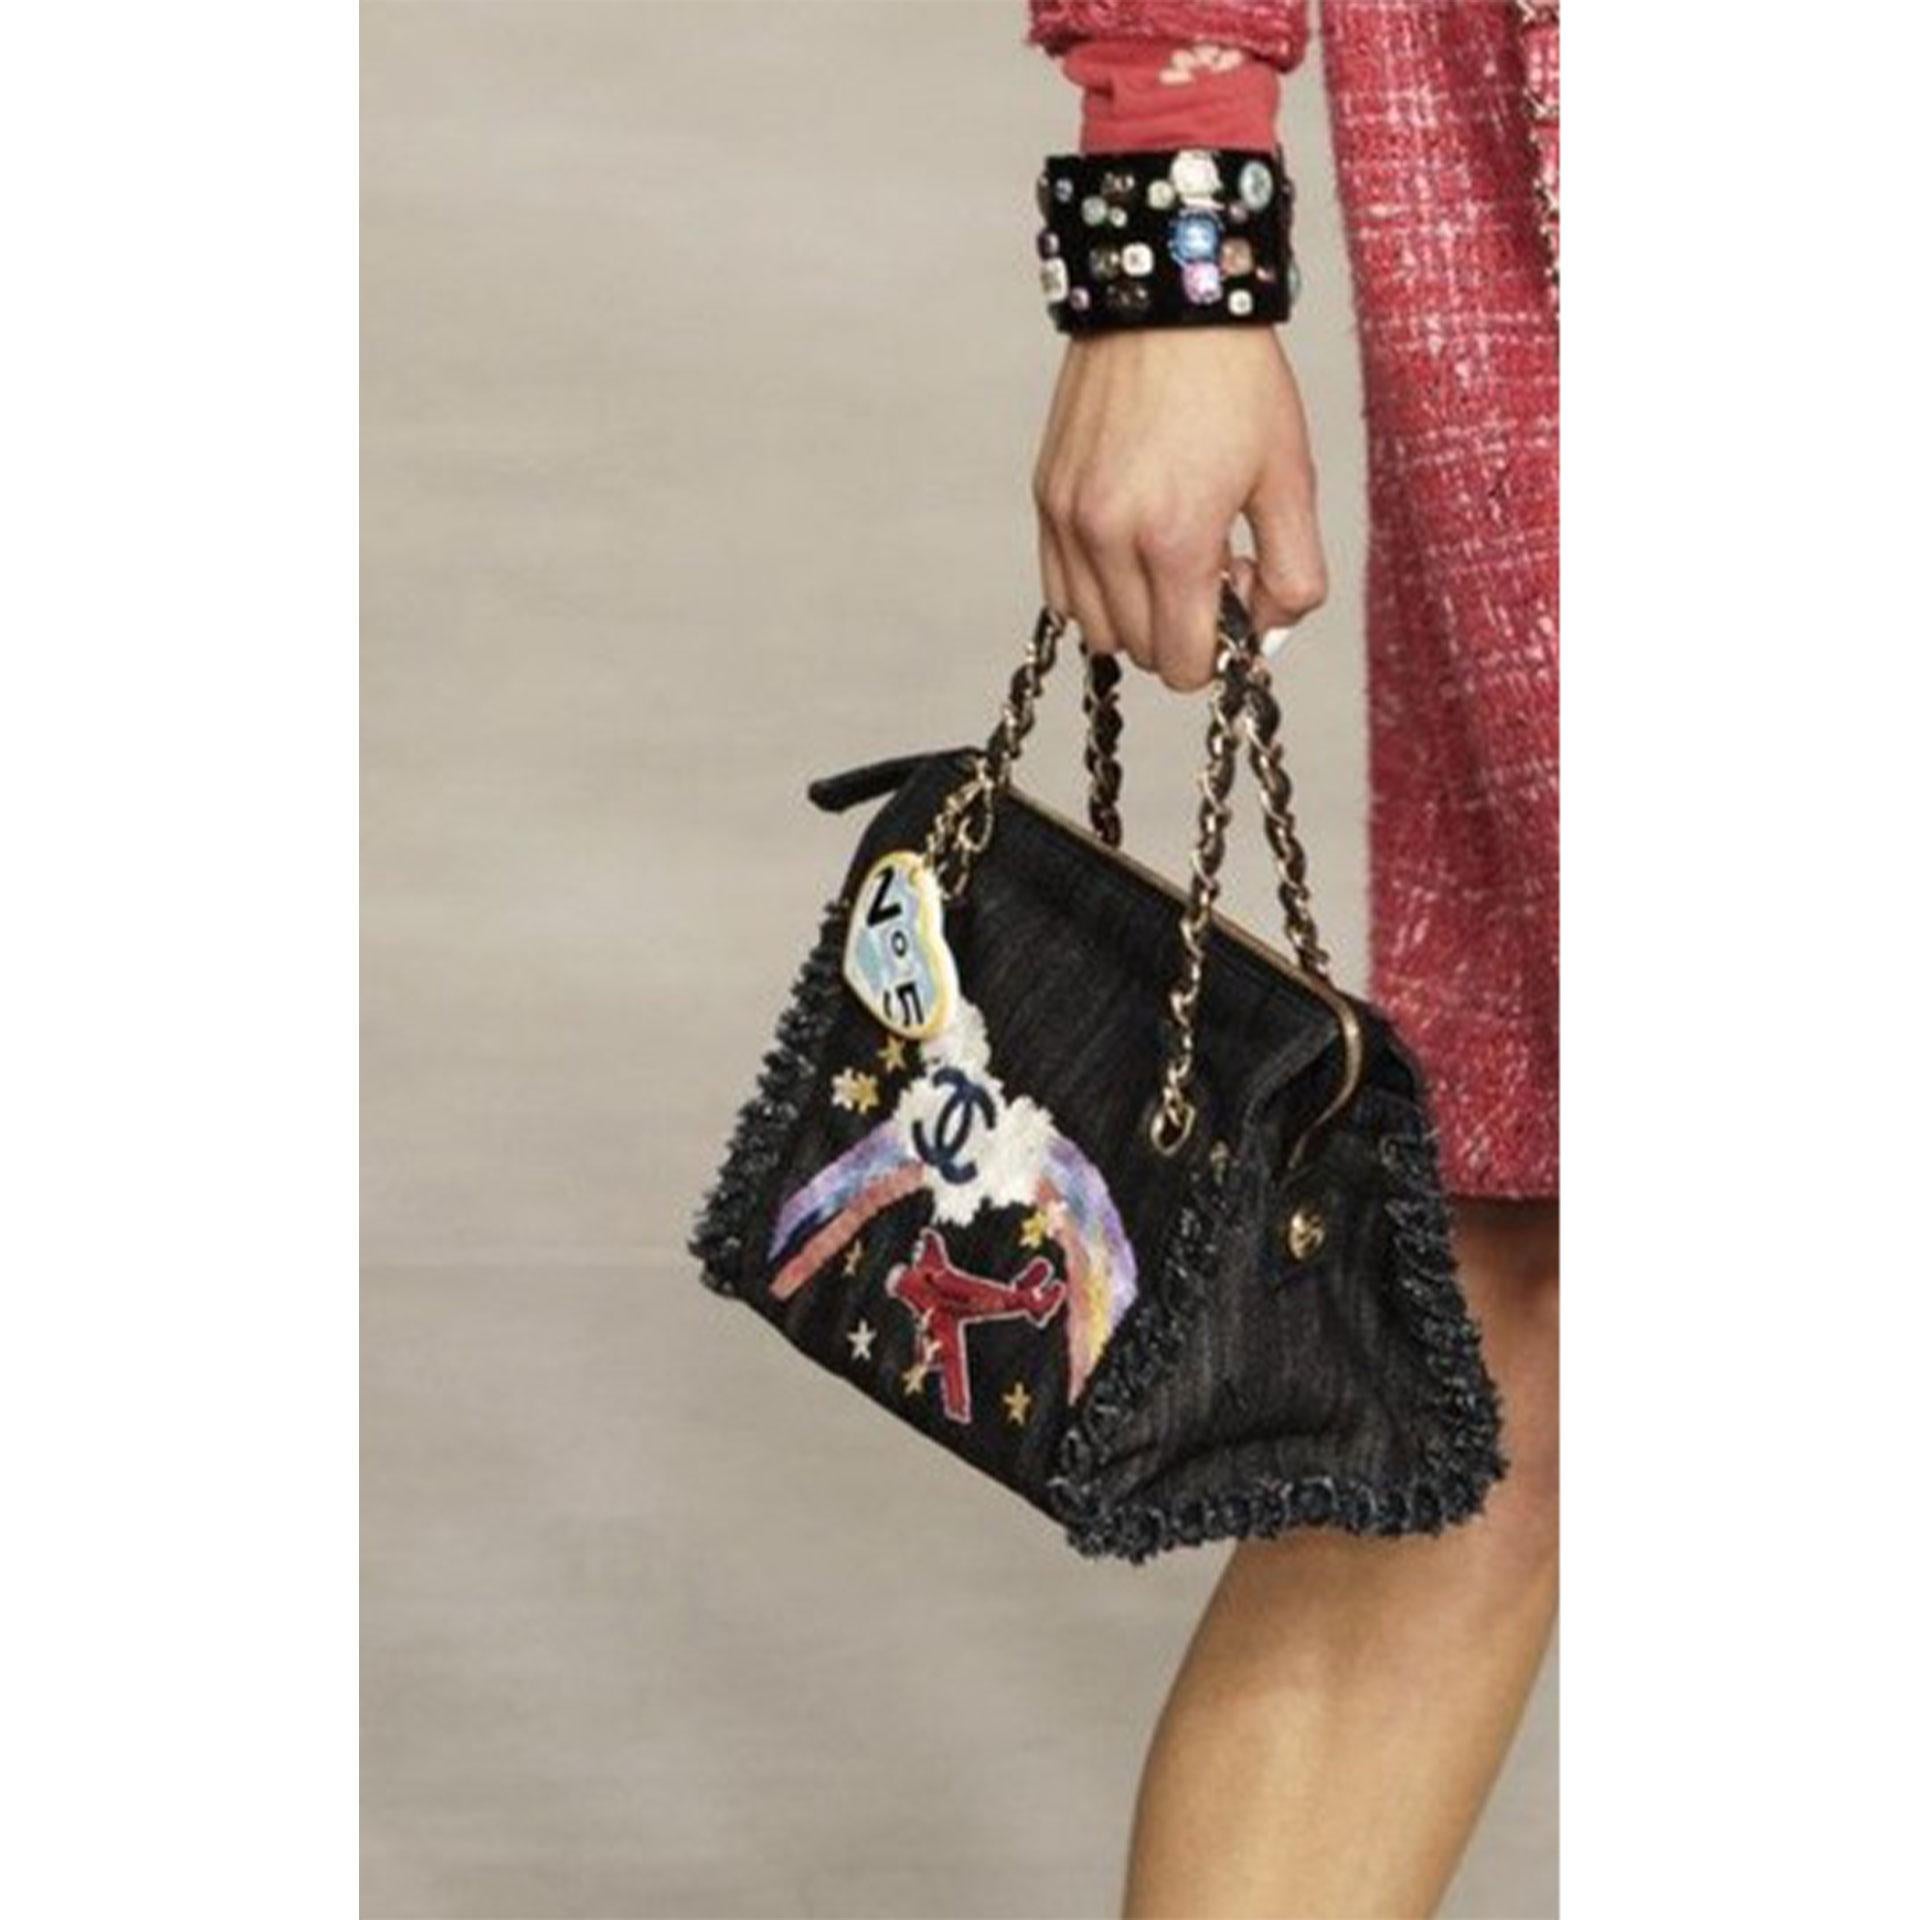 Chanel Rare Limited Edition Denim Airplanes Flap

CHANEL Denim Airplane Embroidered is a stylish shoulder flap bag is made of fine denim with an airplane patch, a rainbow and a blue Chanel CC embroidered into the bag. The bag features gold chain